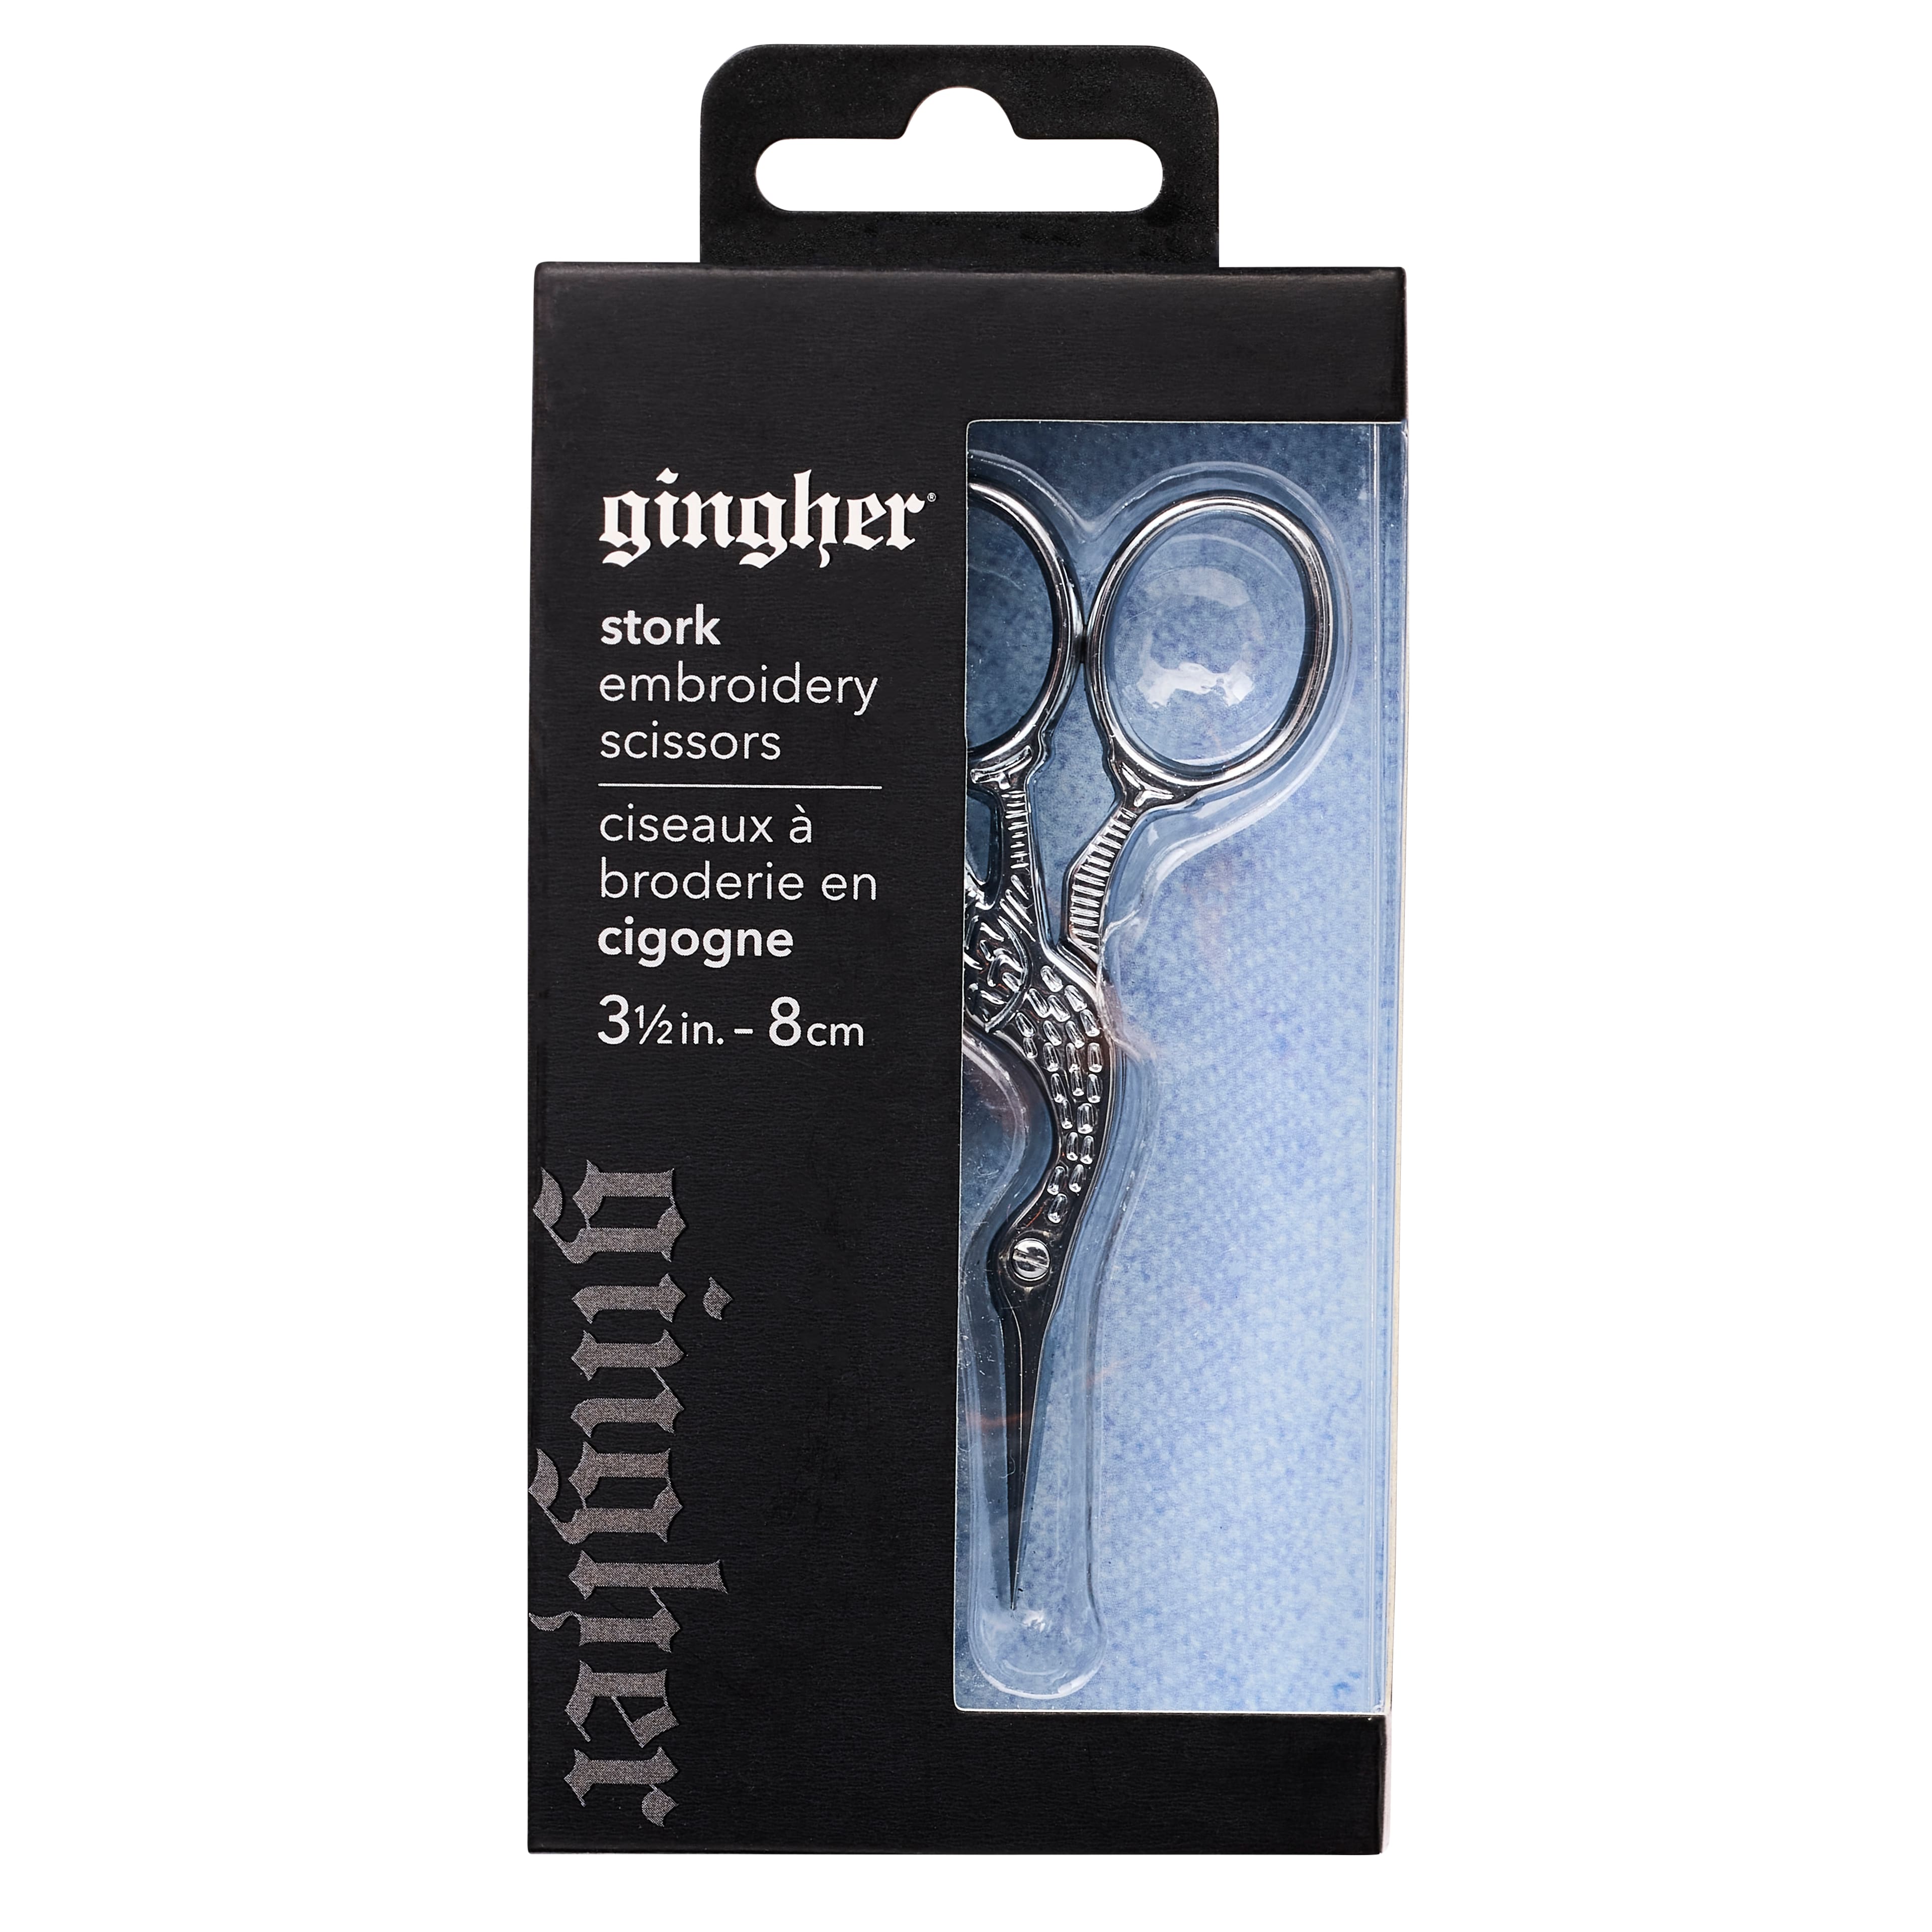 Gingher G-CST 3-1/2 inch Stork Embroidery Scissors (Chrome Handle)